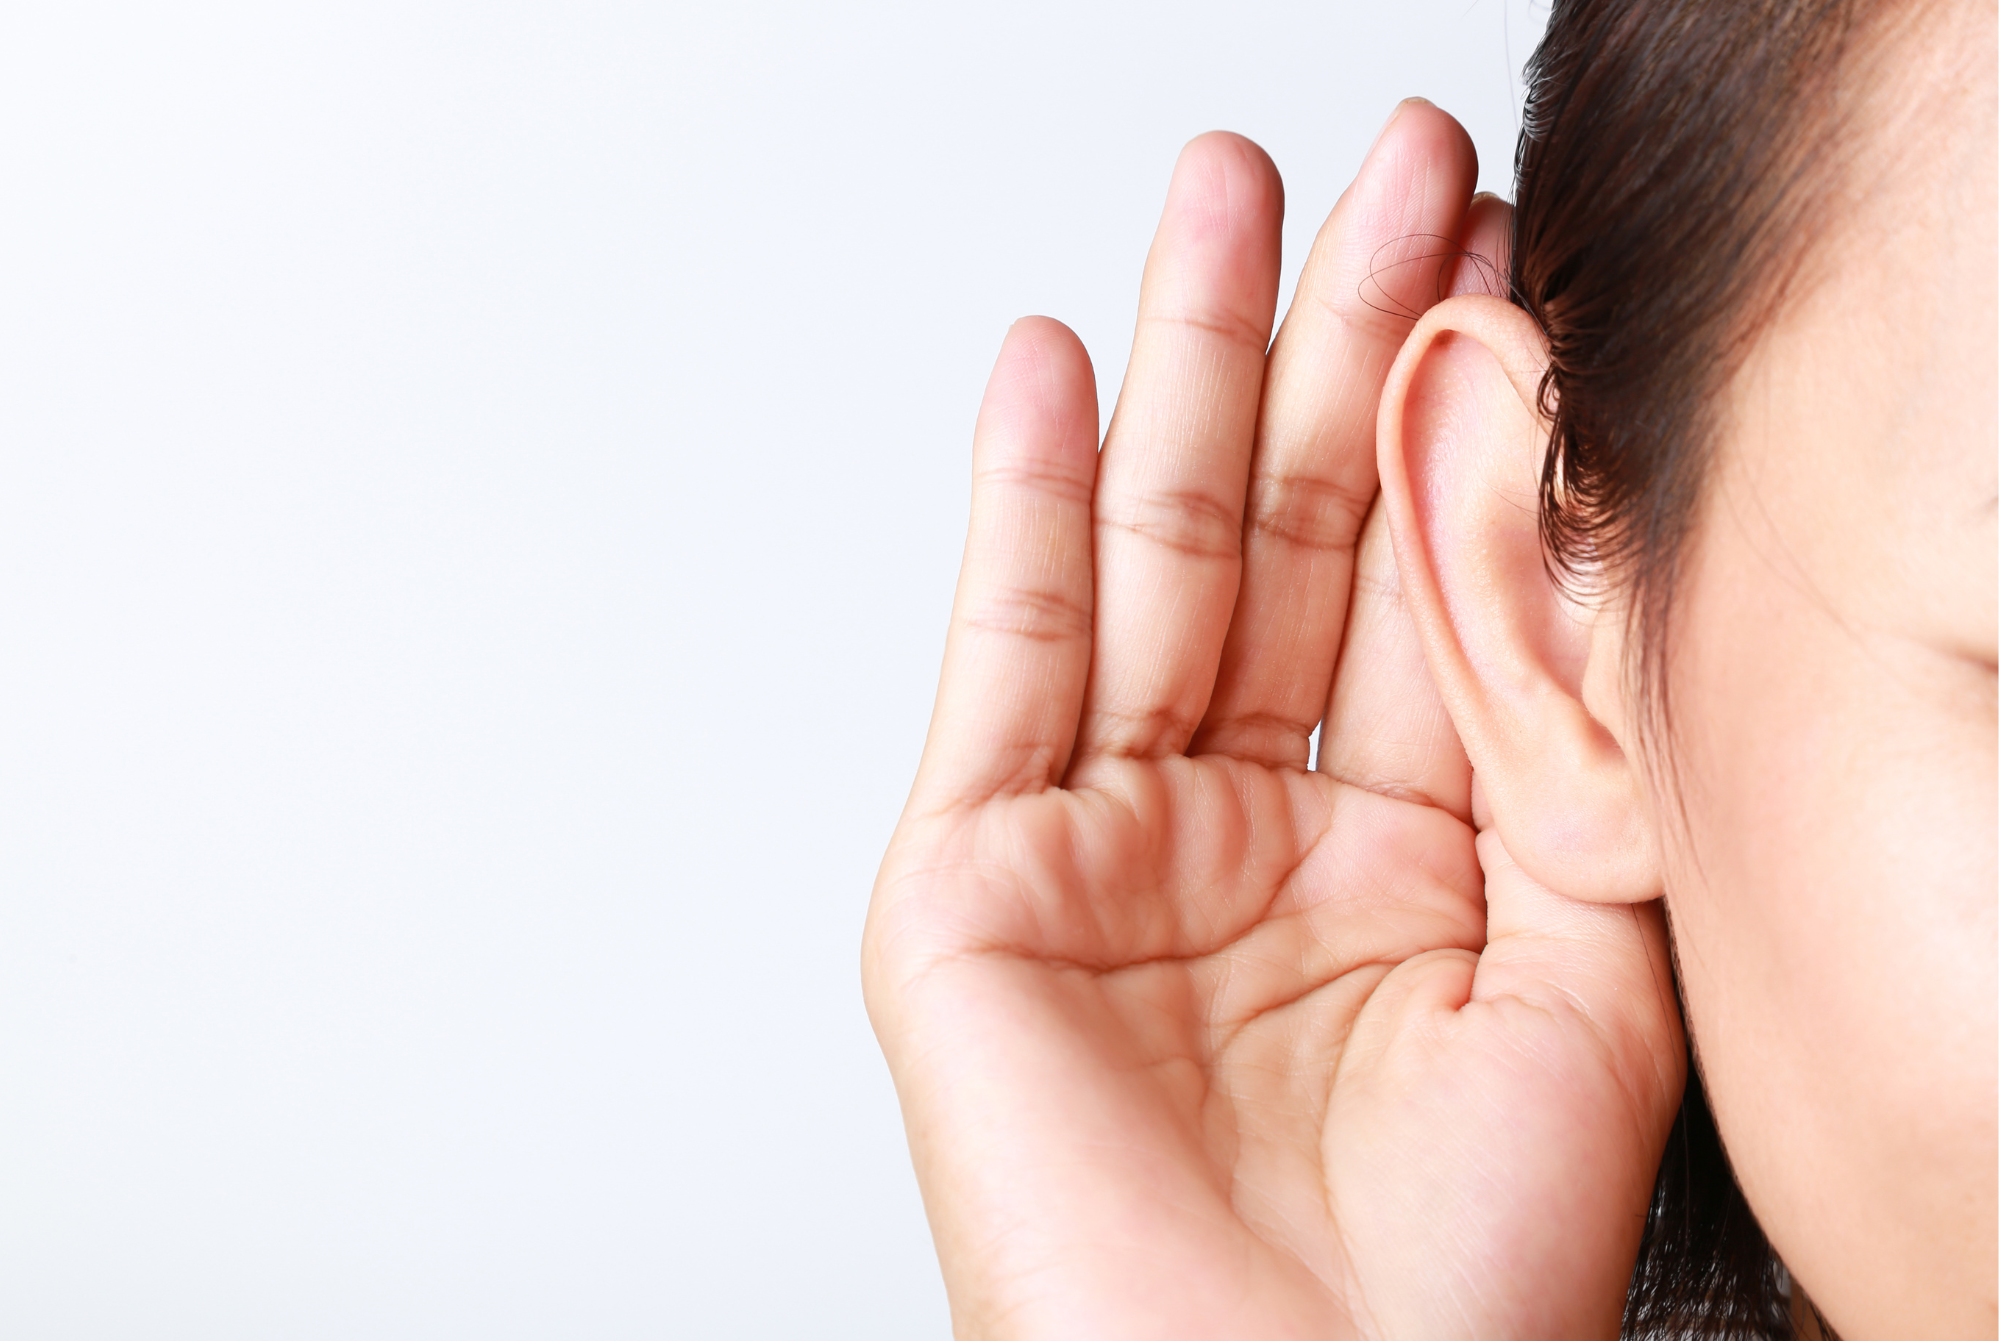 A tween or tween girl with tan skin and dark hair puts her hand behind her ear to listen better.